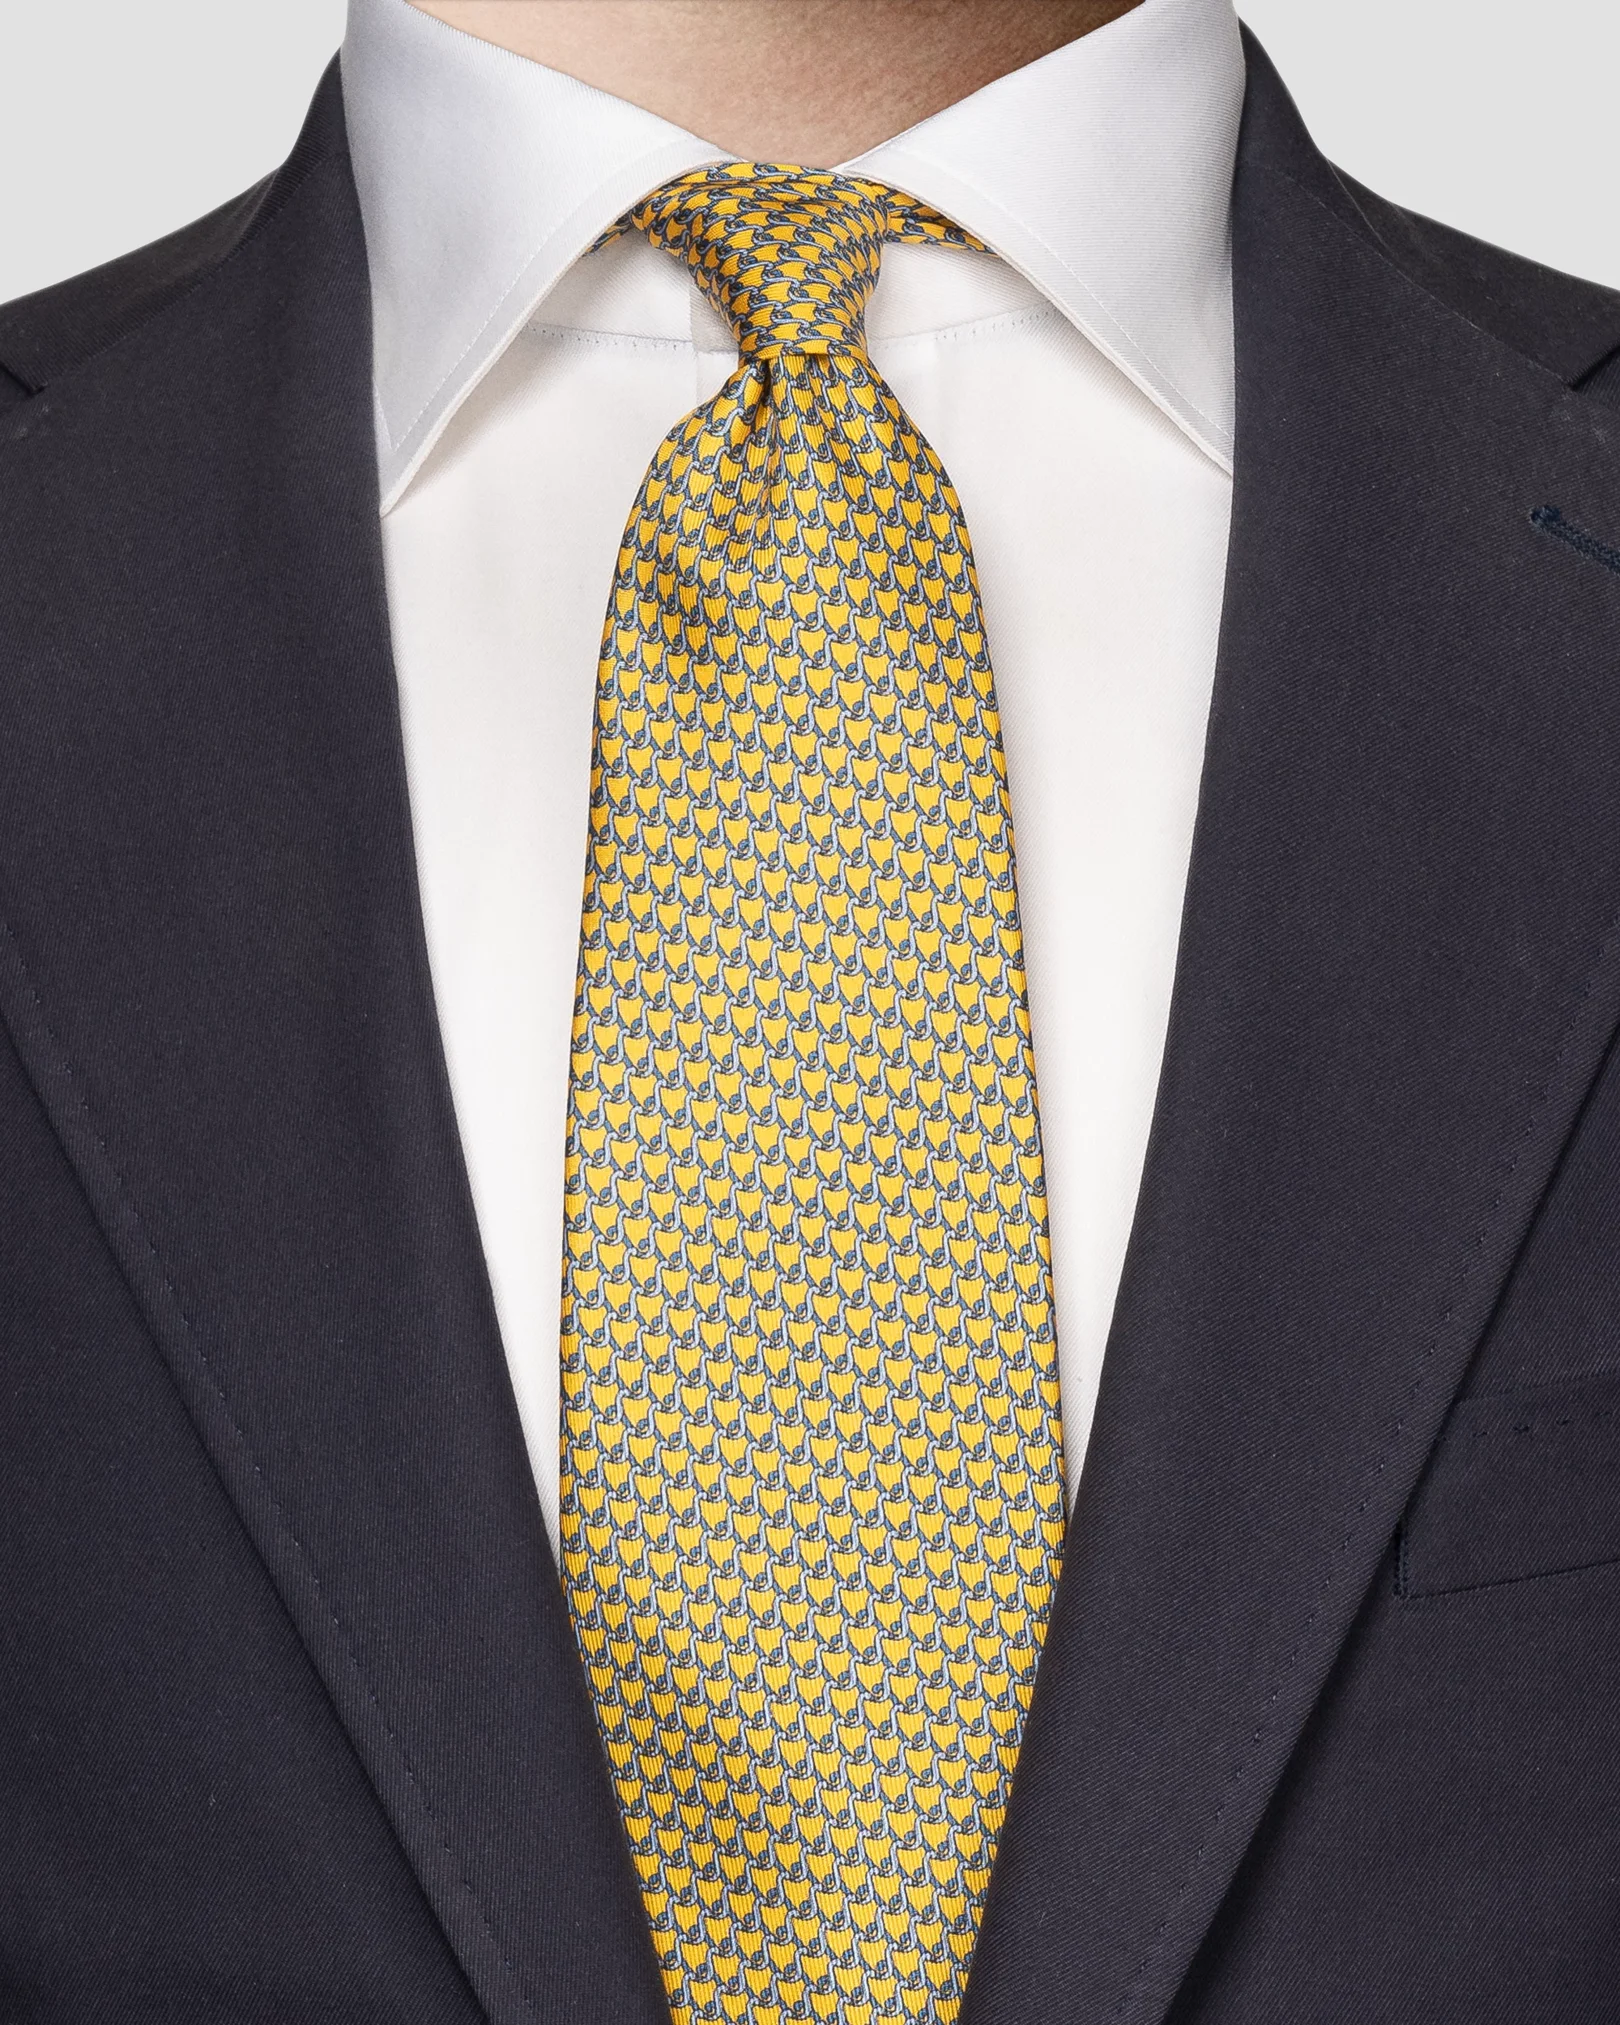 Eton - yellow crafted tie